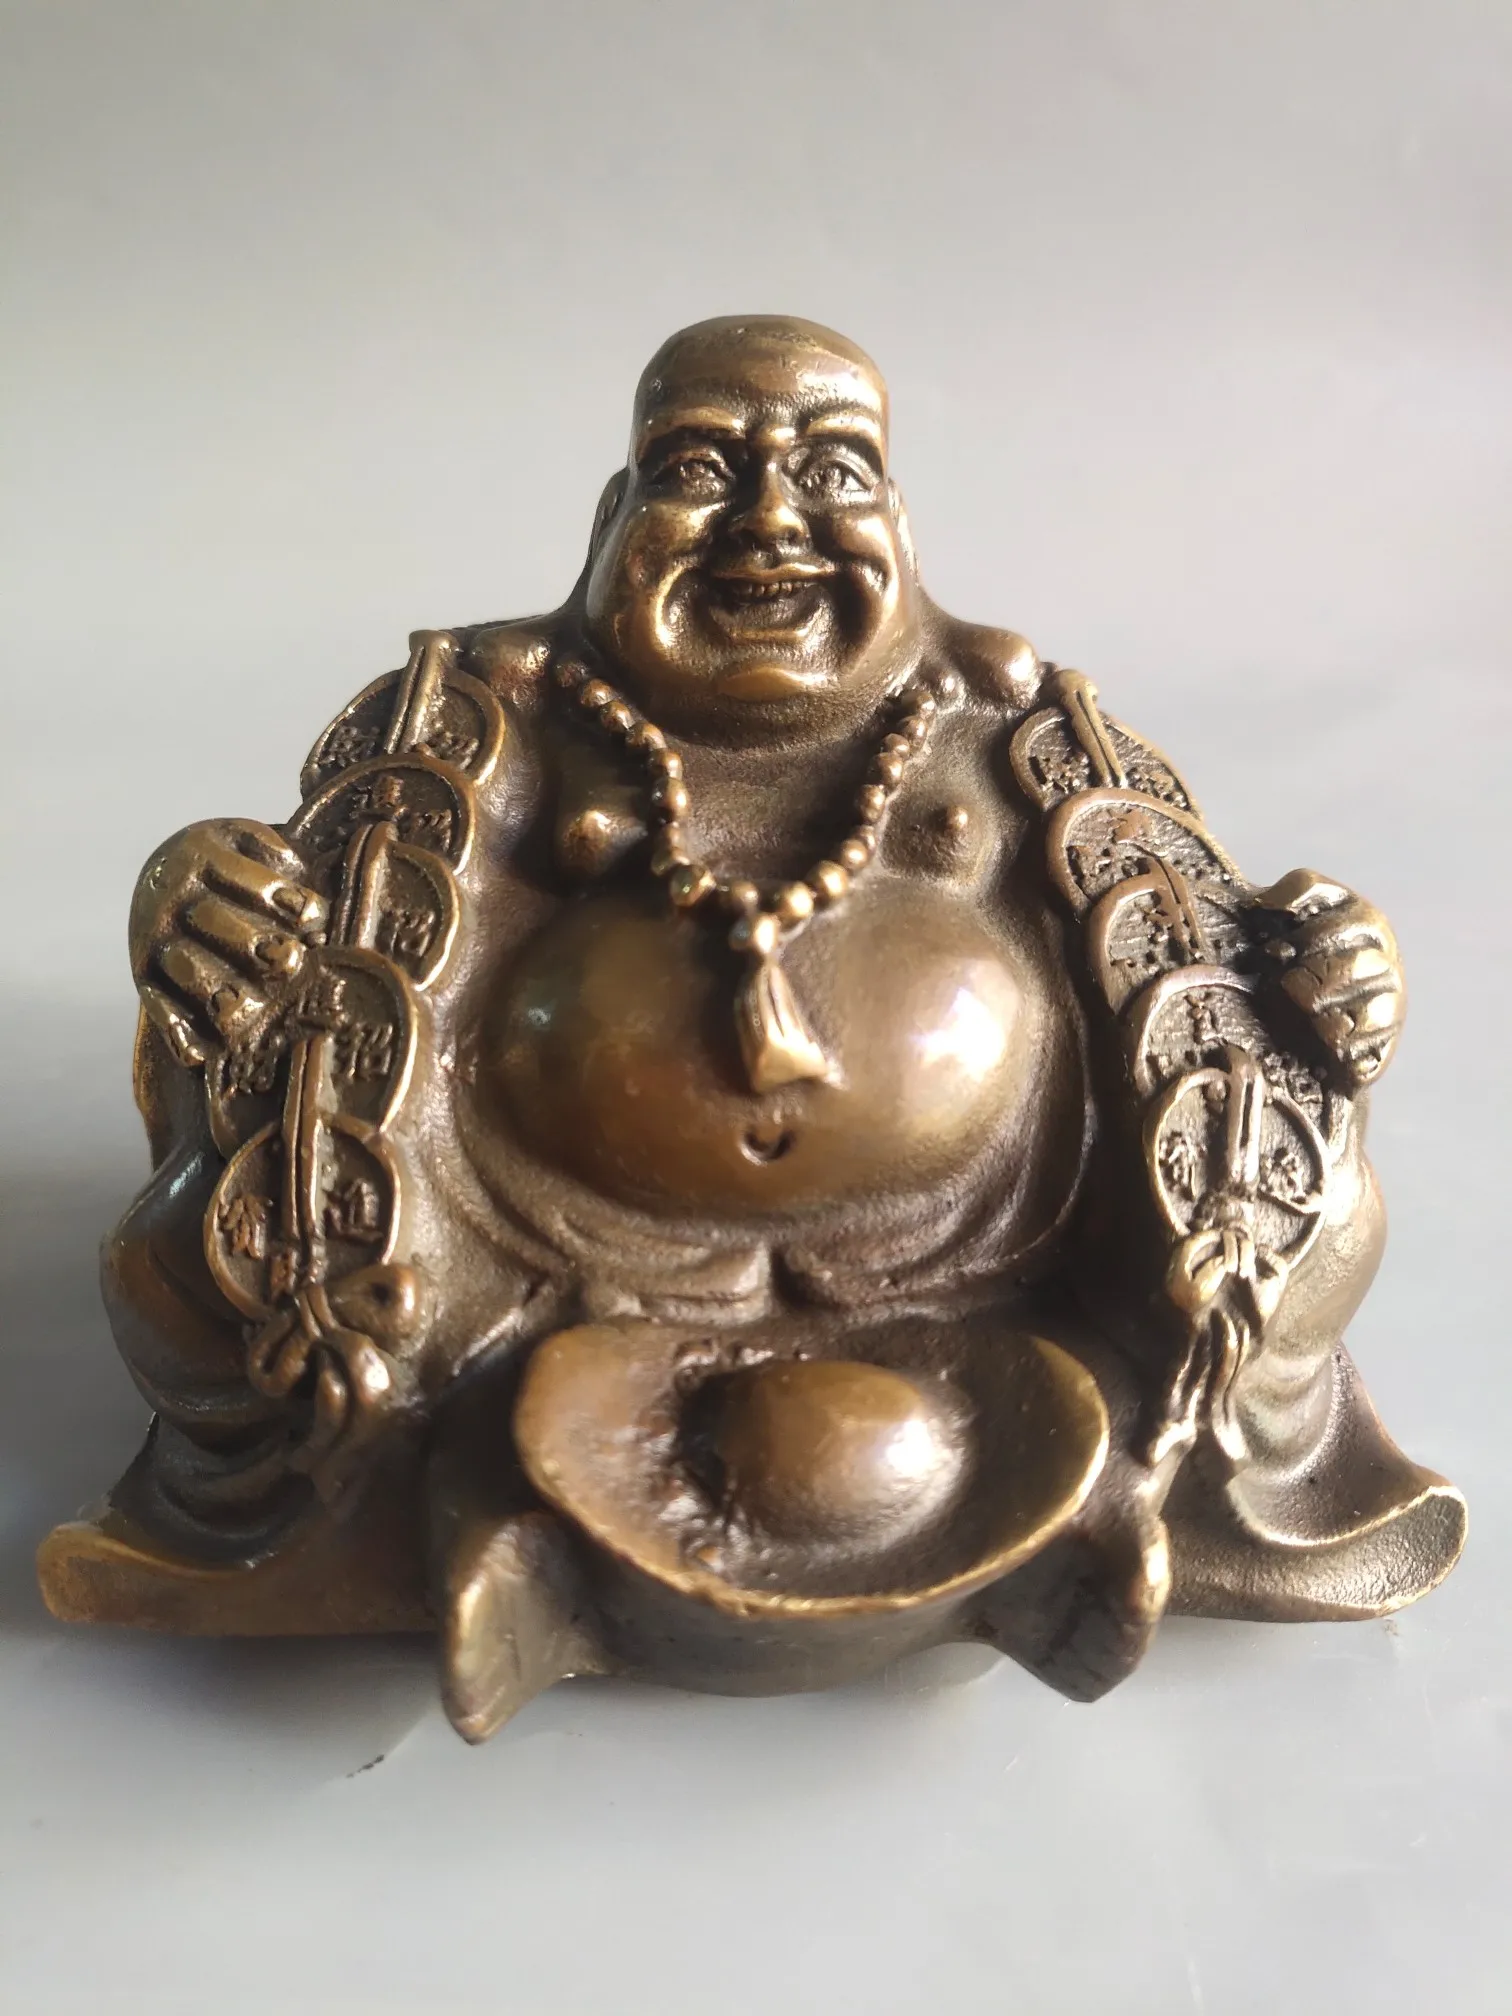 

A Classic Pure Copper Sculpture With a Beautiful Appearance and Exquisite Craftsmanship The Buddha Statue is Worth Collecting